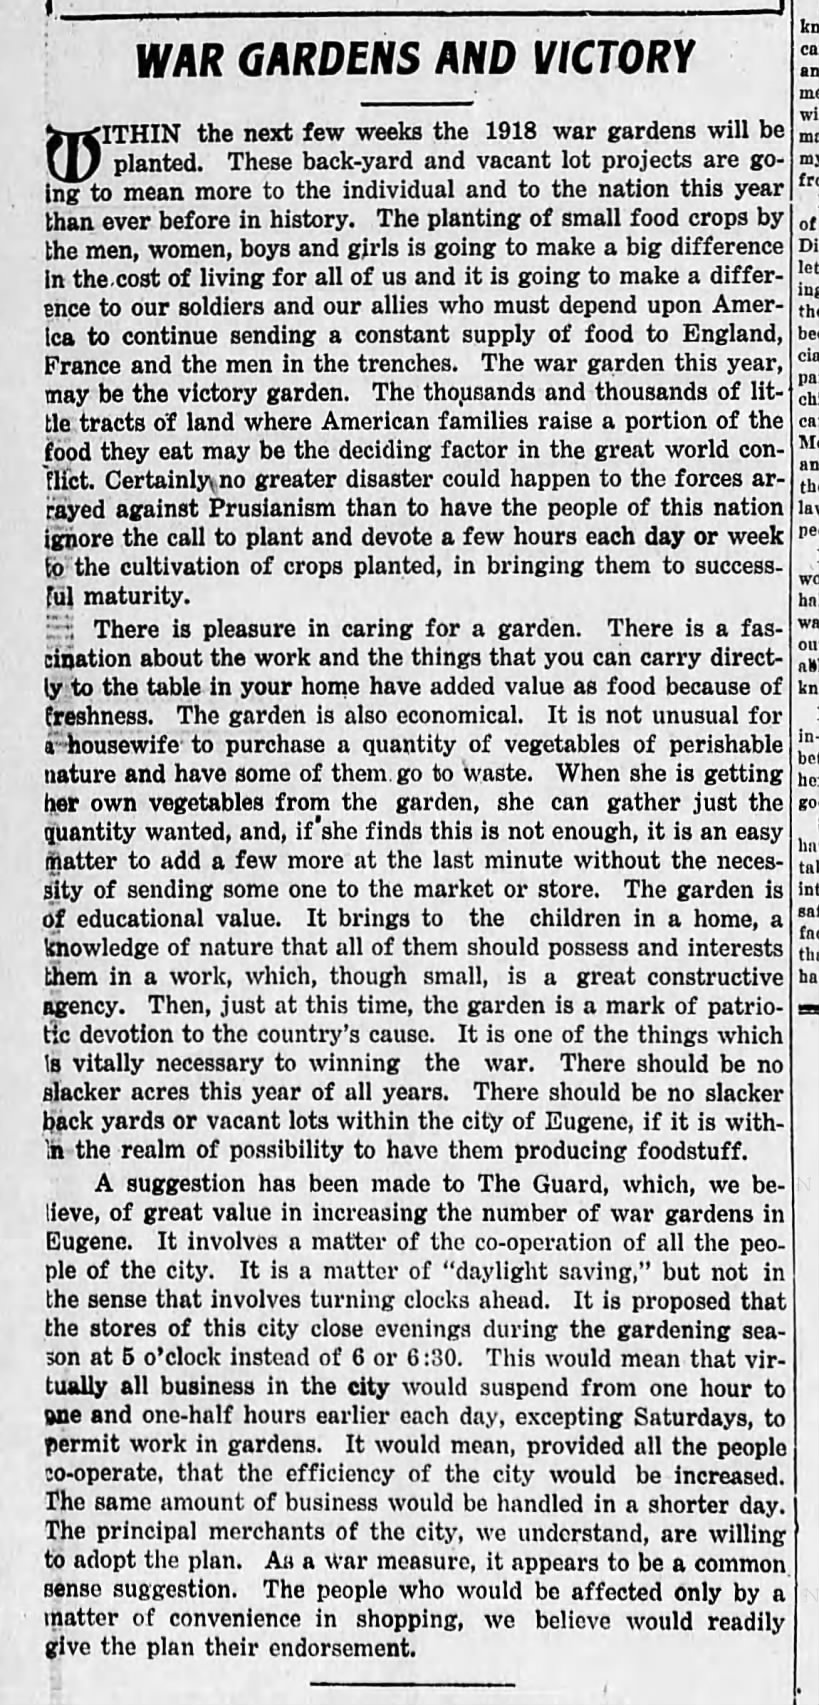 WWI article promoting planting war gardens